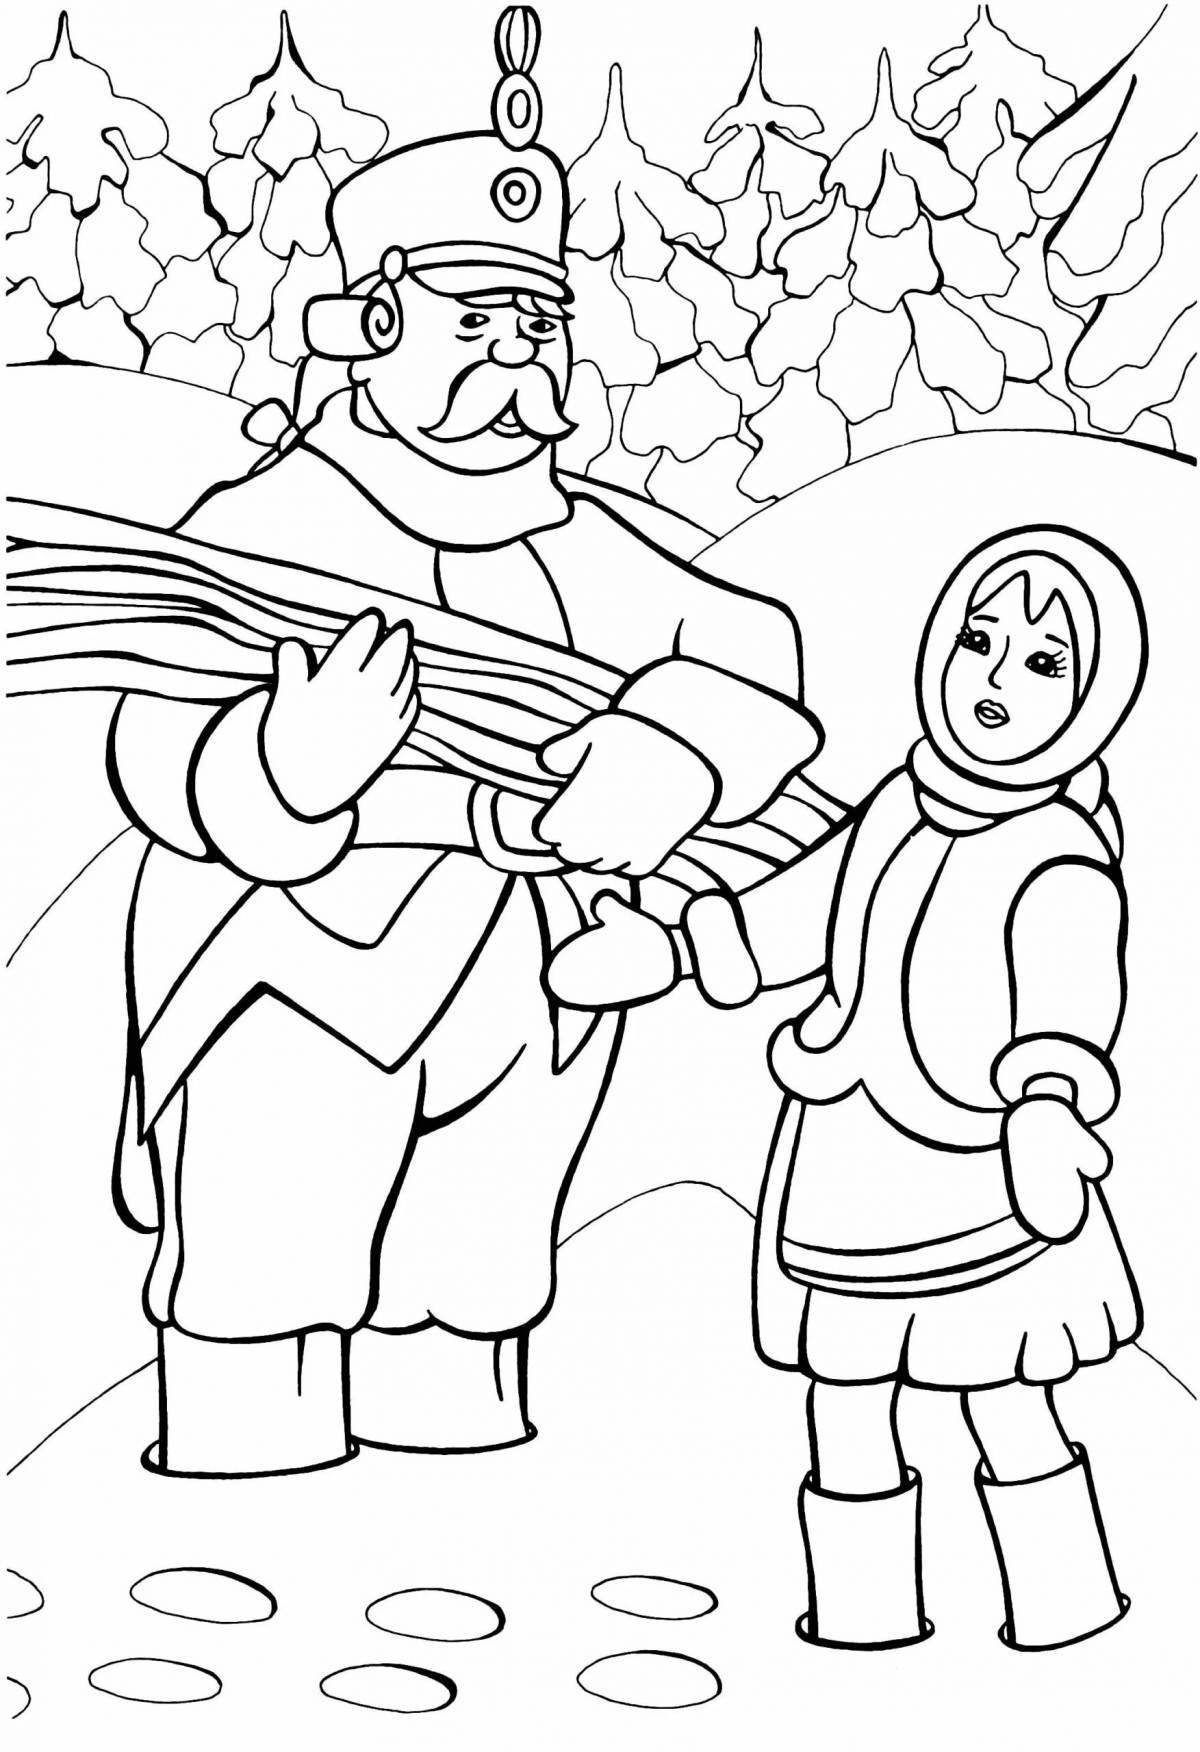 Adorable twelve months coloring book for kids